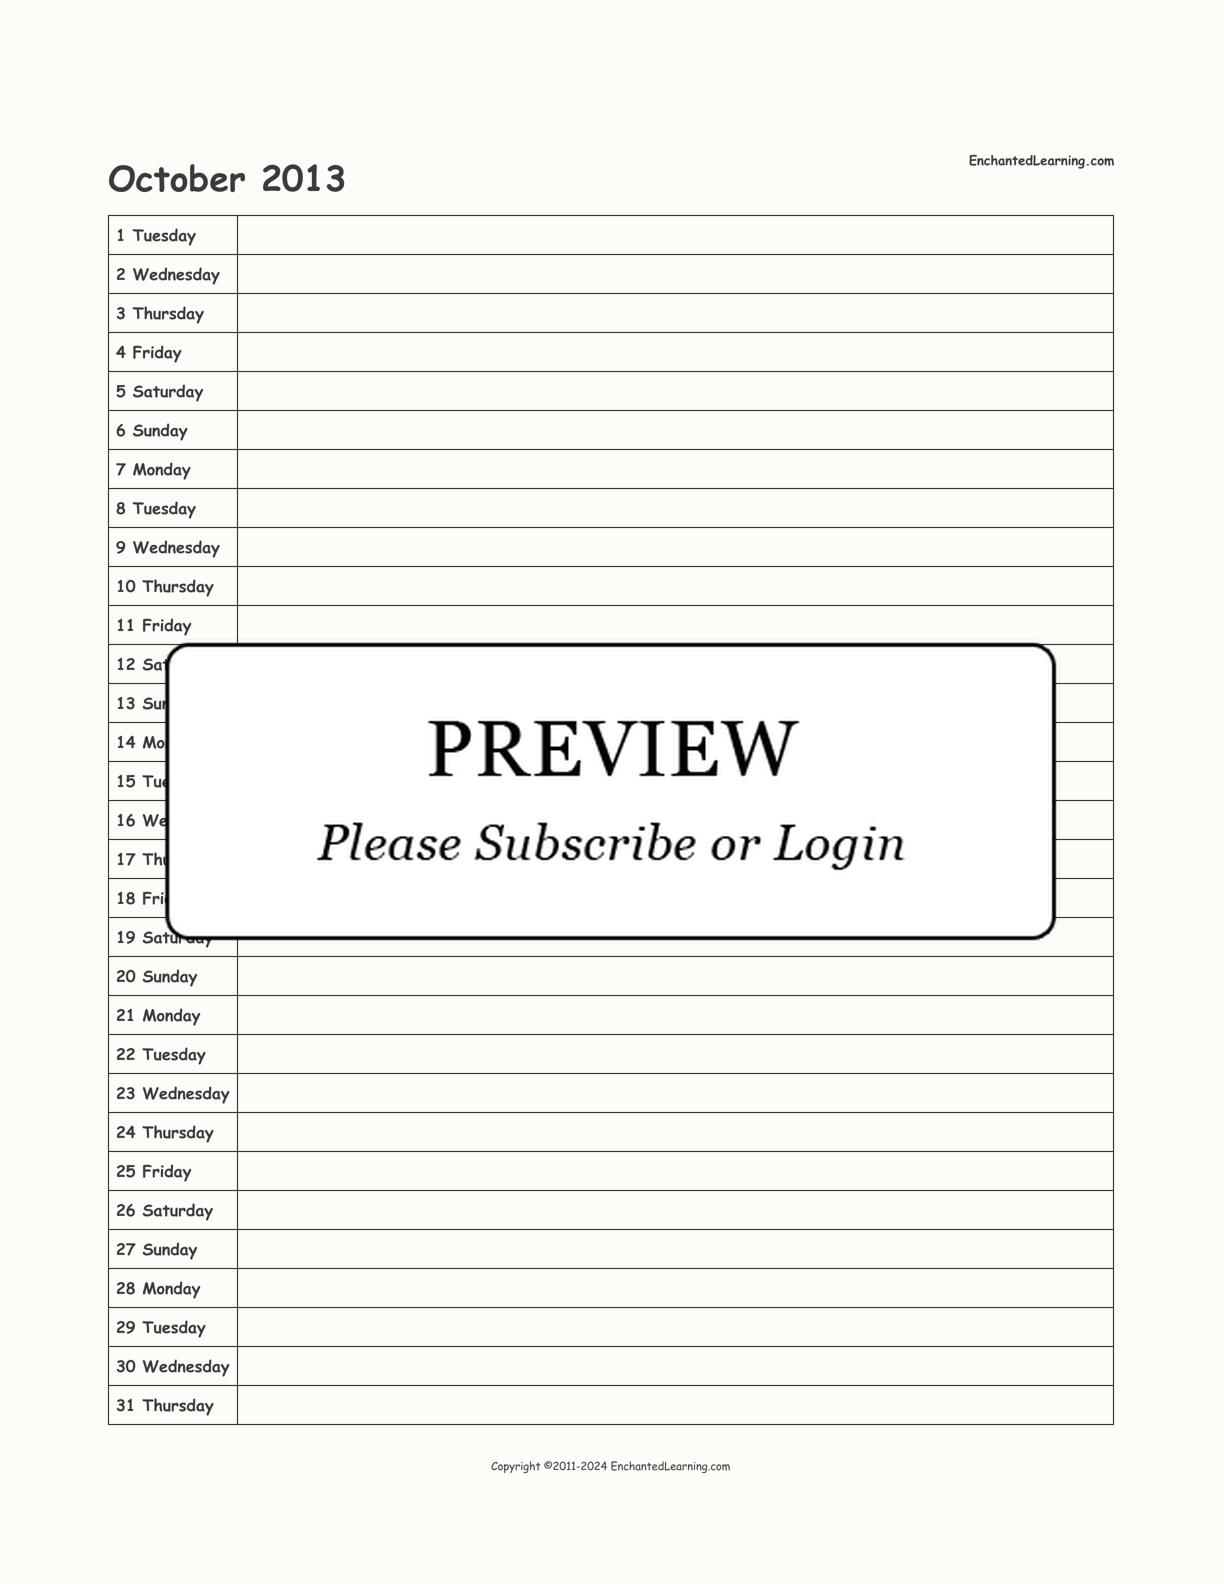 2013 Scheduling Calendar interactive printout page 10